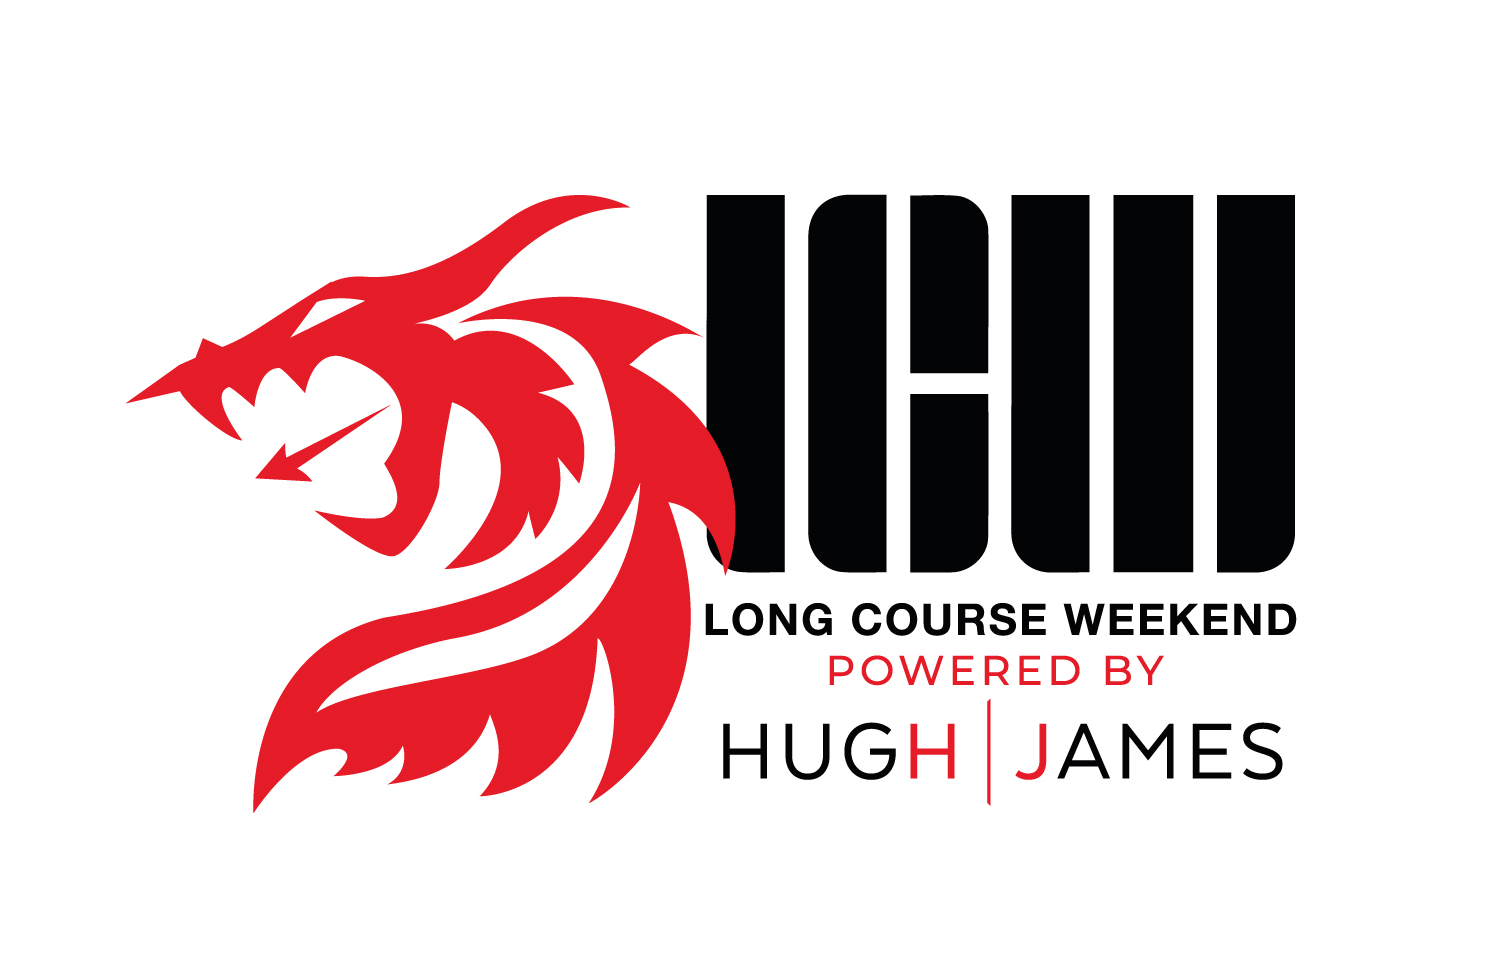 Long Course Weekend powered by Hugh James